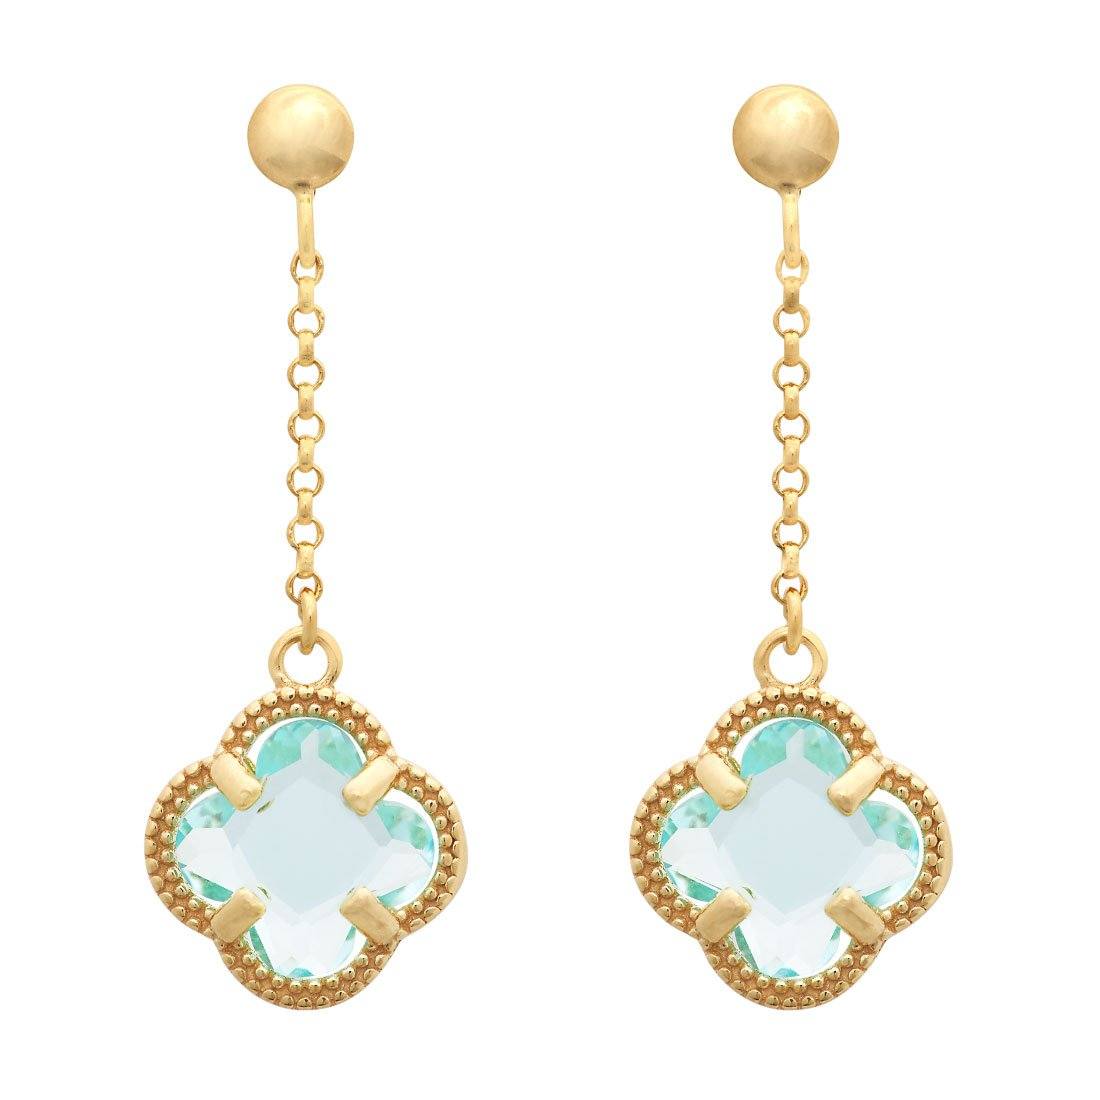 Blue 4 Leaf Clover Drop Earrings in 9ct Yellow Gold Silver Infused Earrings Bevilles 